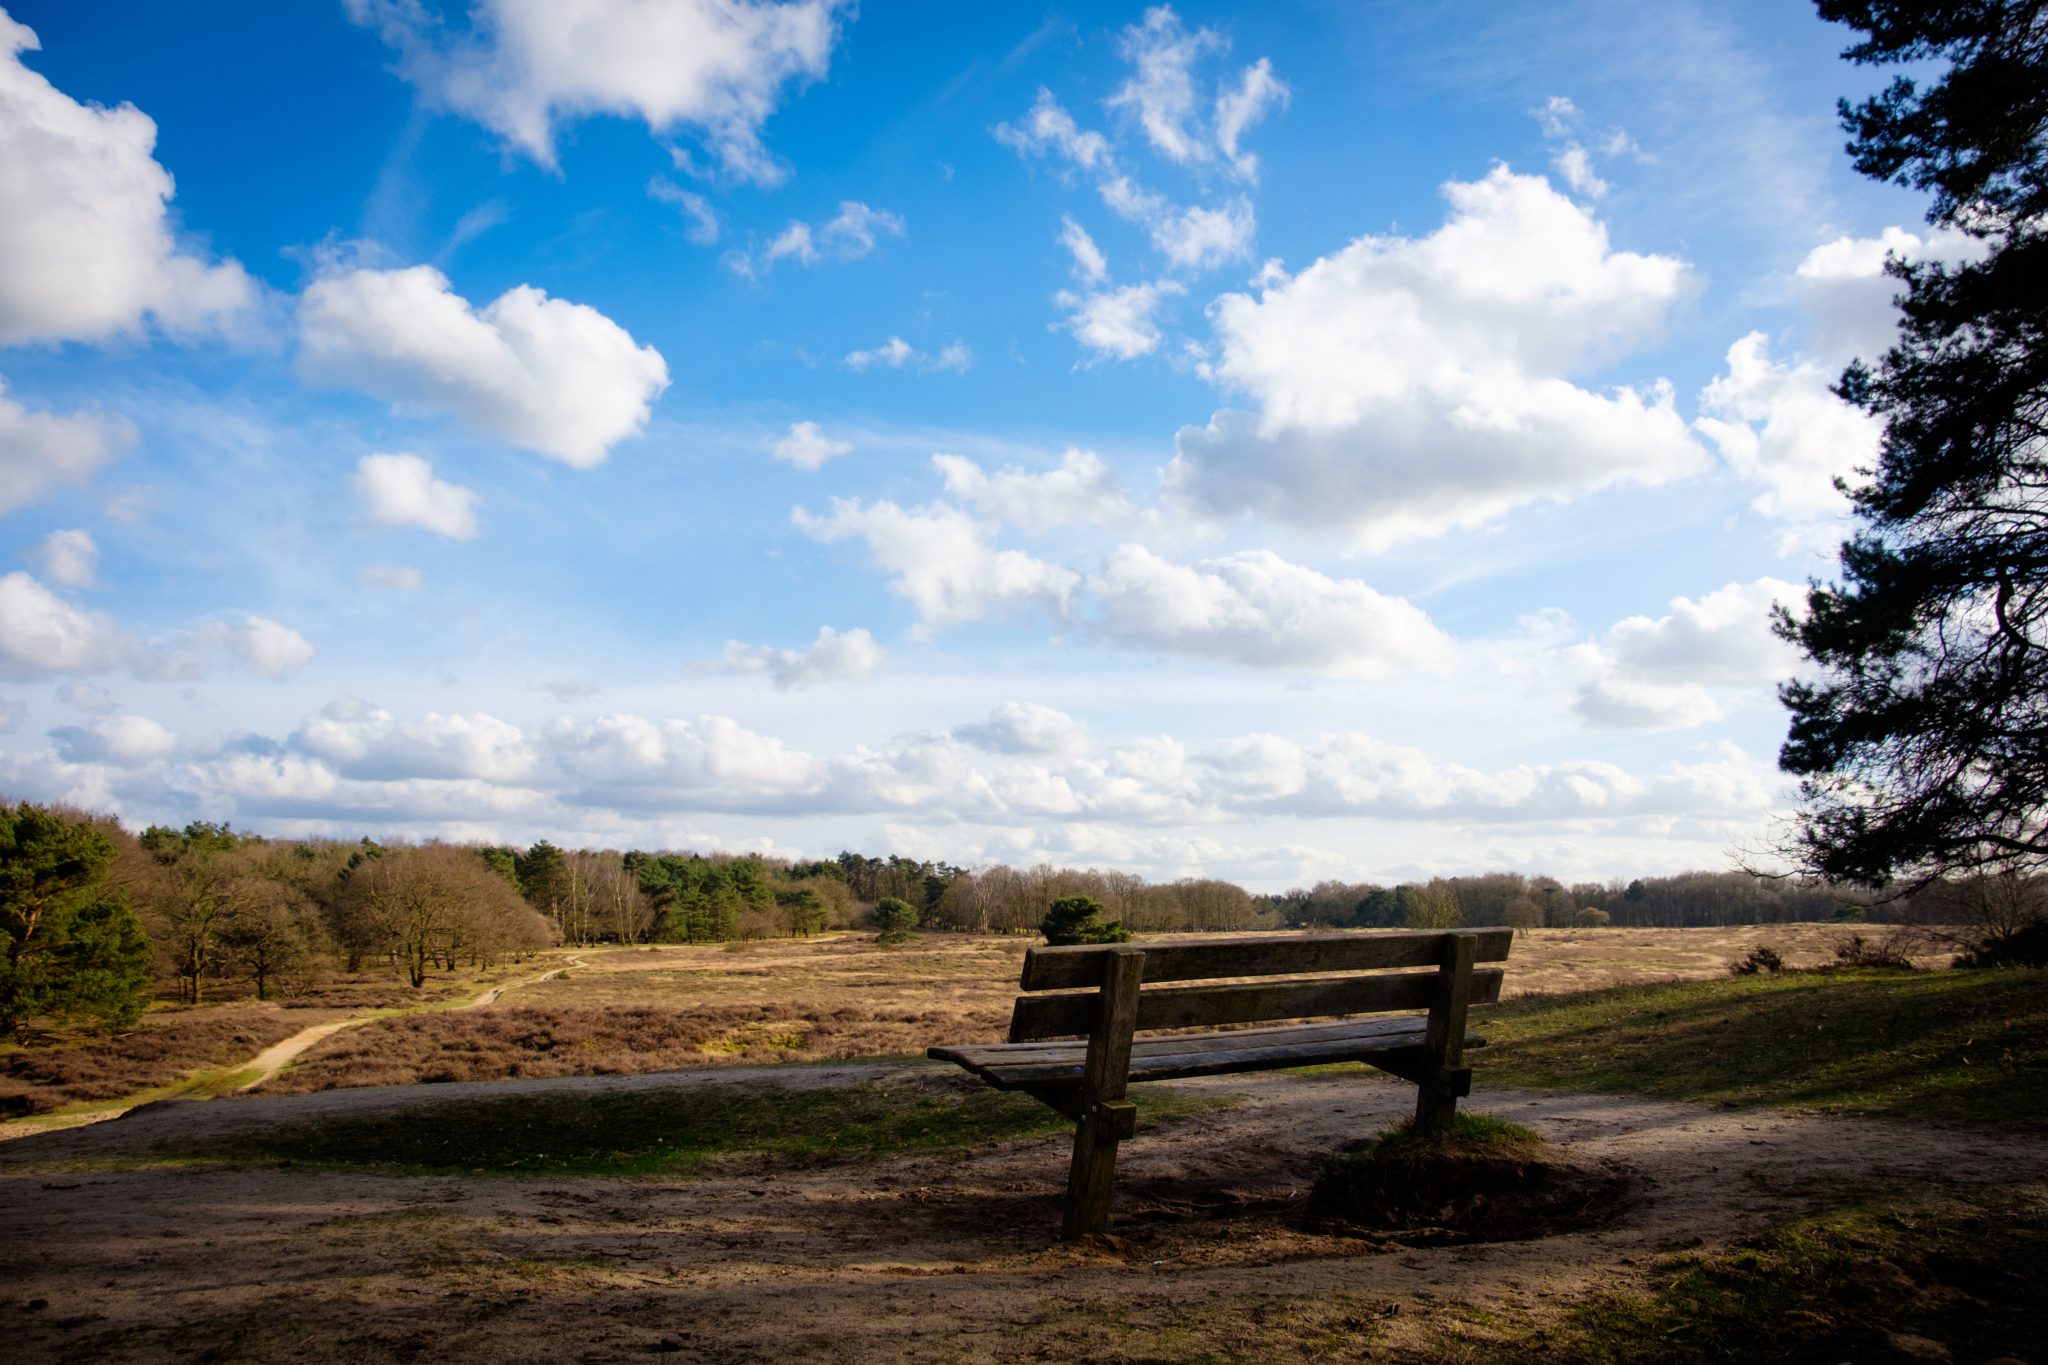 Bench overlooking a hay field in The Netherlands